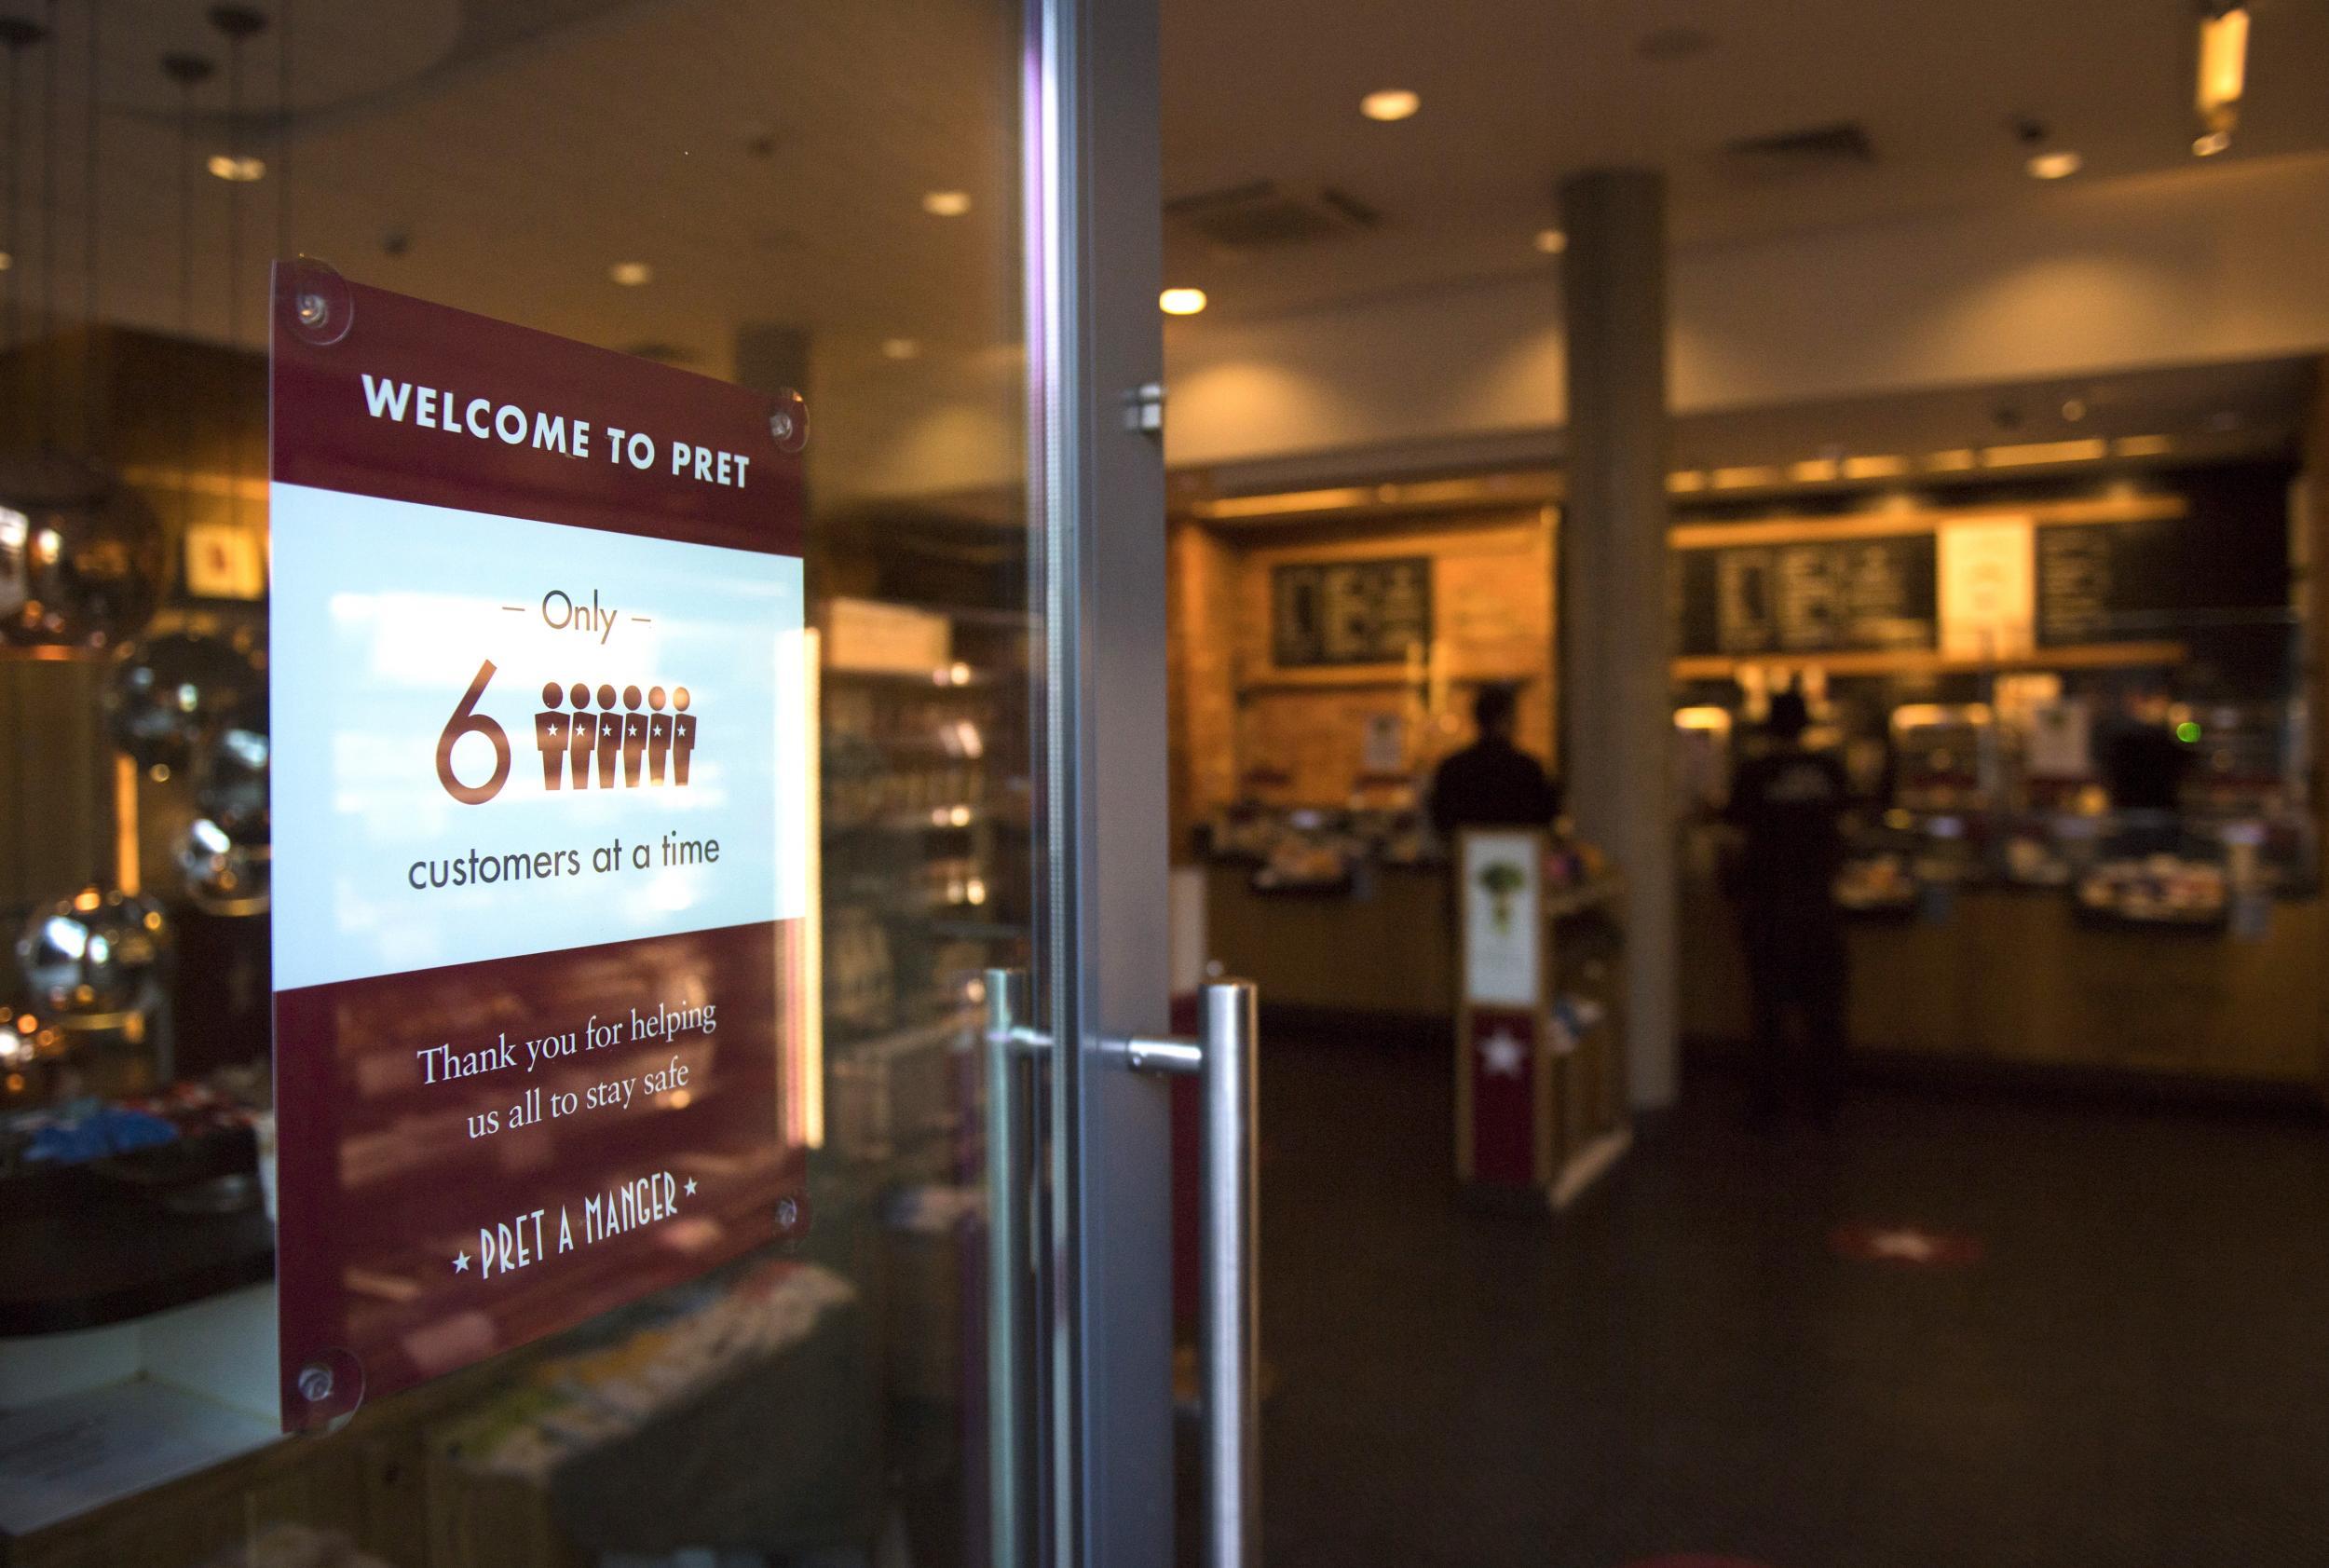 Pret stores will only allow six customers to enter at any one time (Pret)